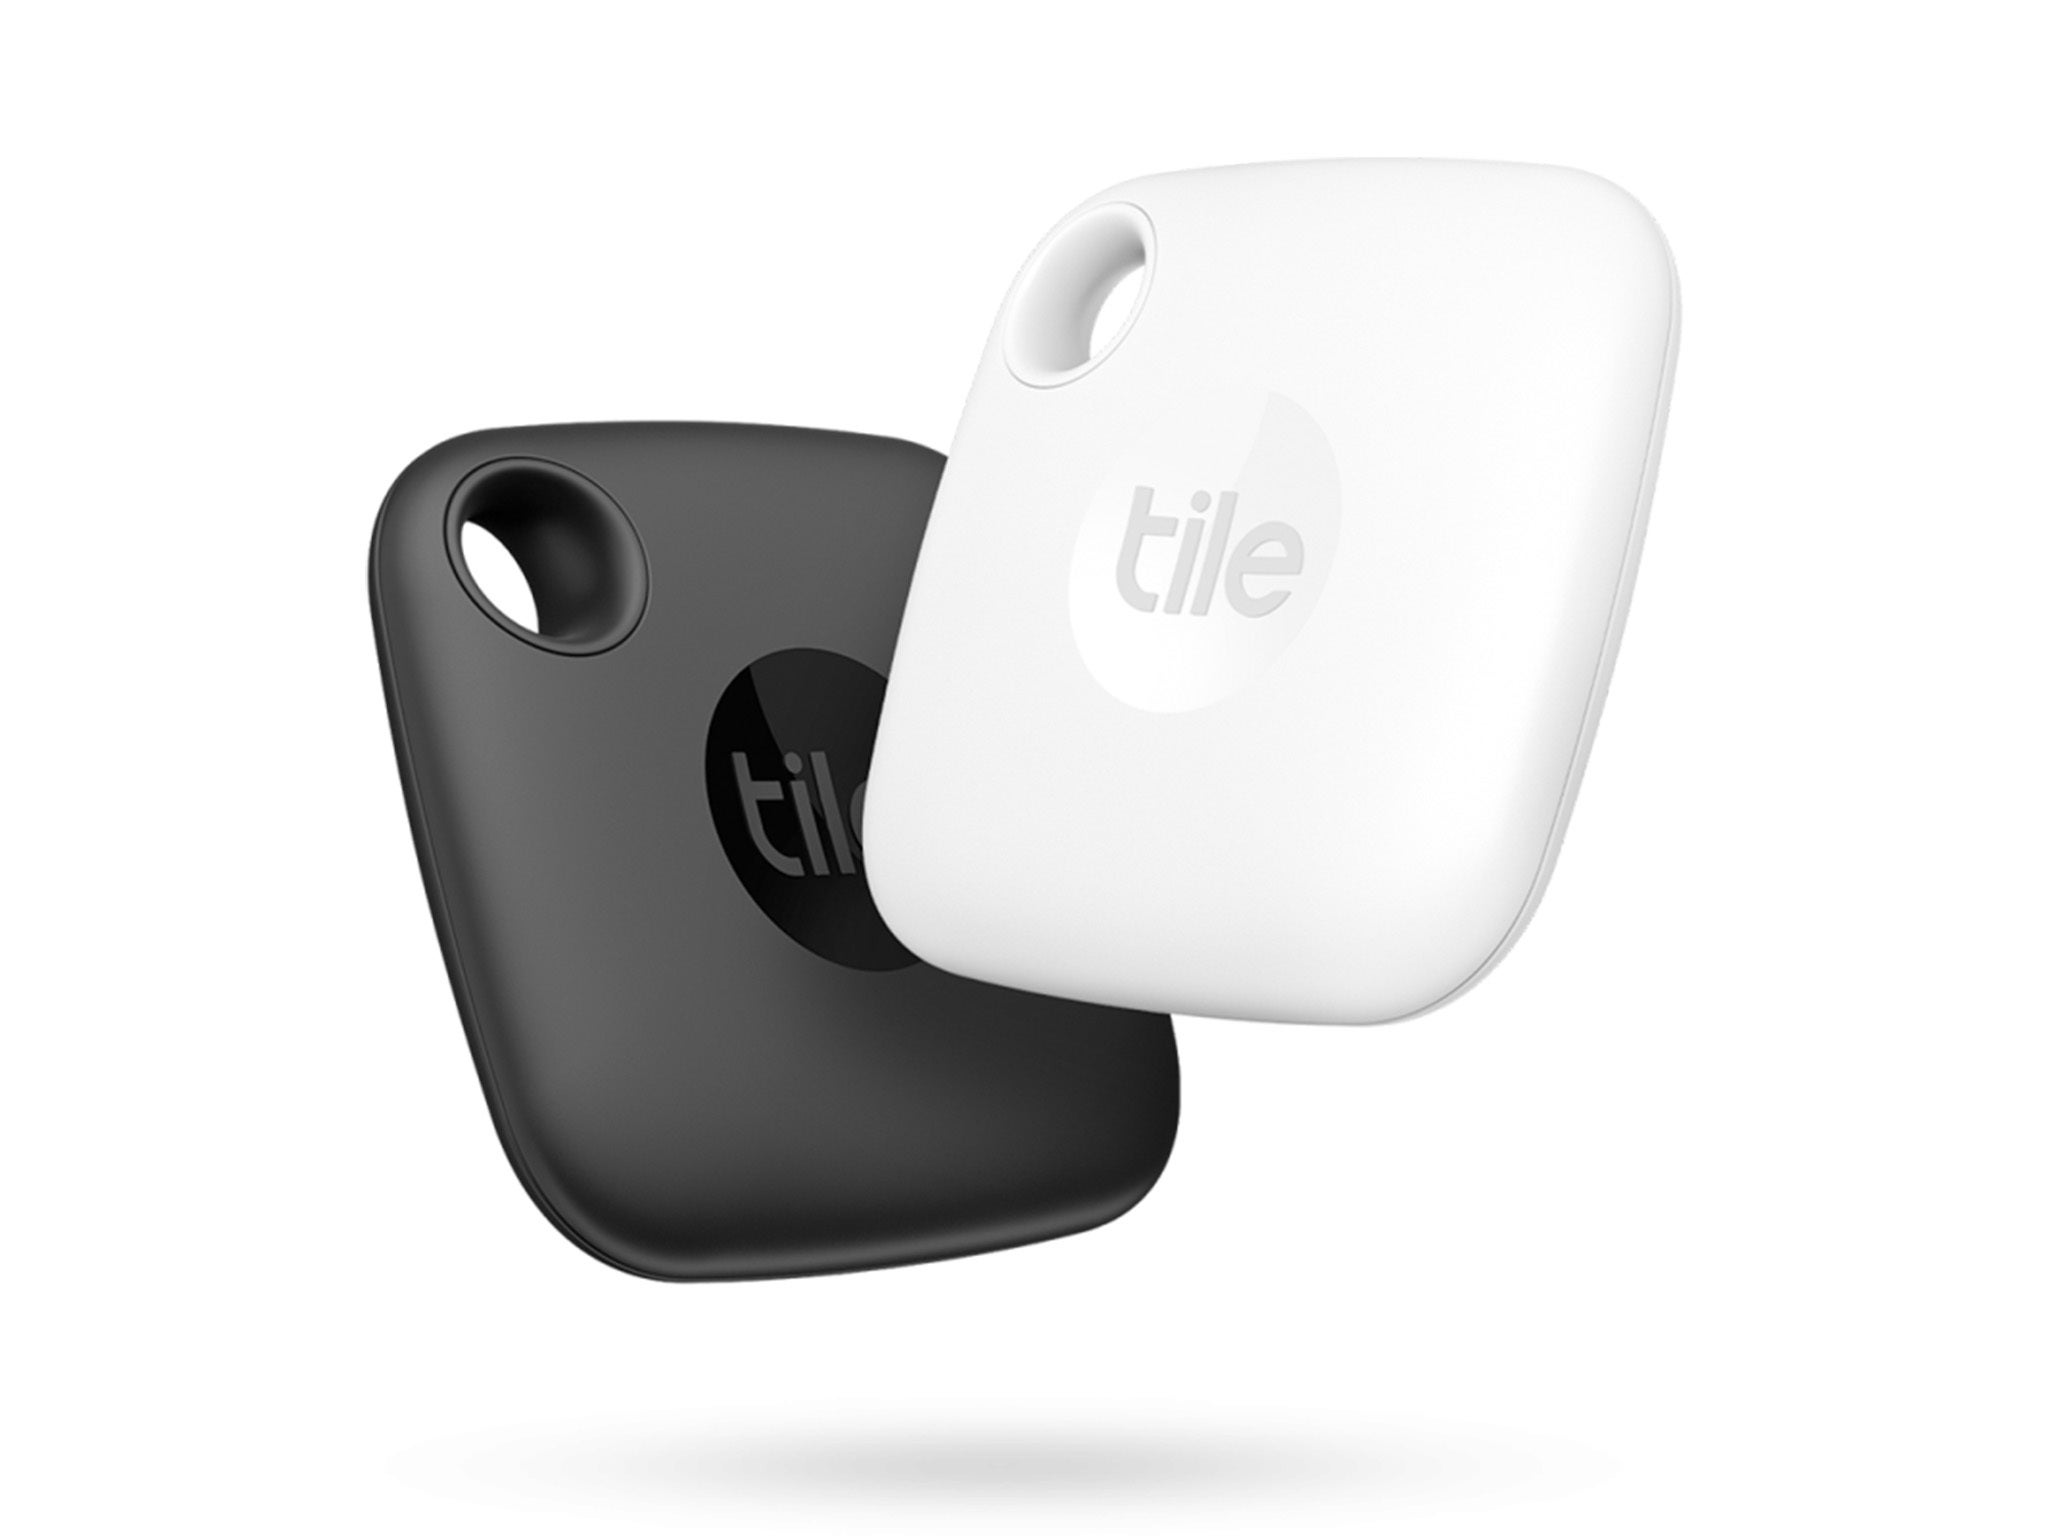 Tile mate vs Tile pro: Which is the best Bluetooth tracker for finding your  keys?